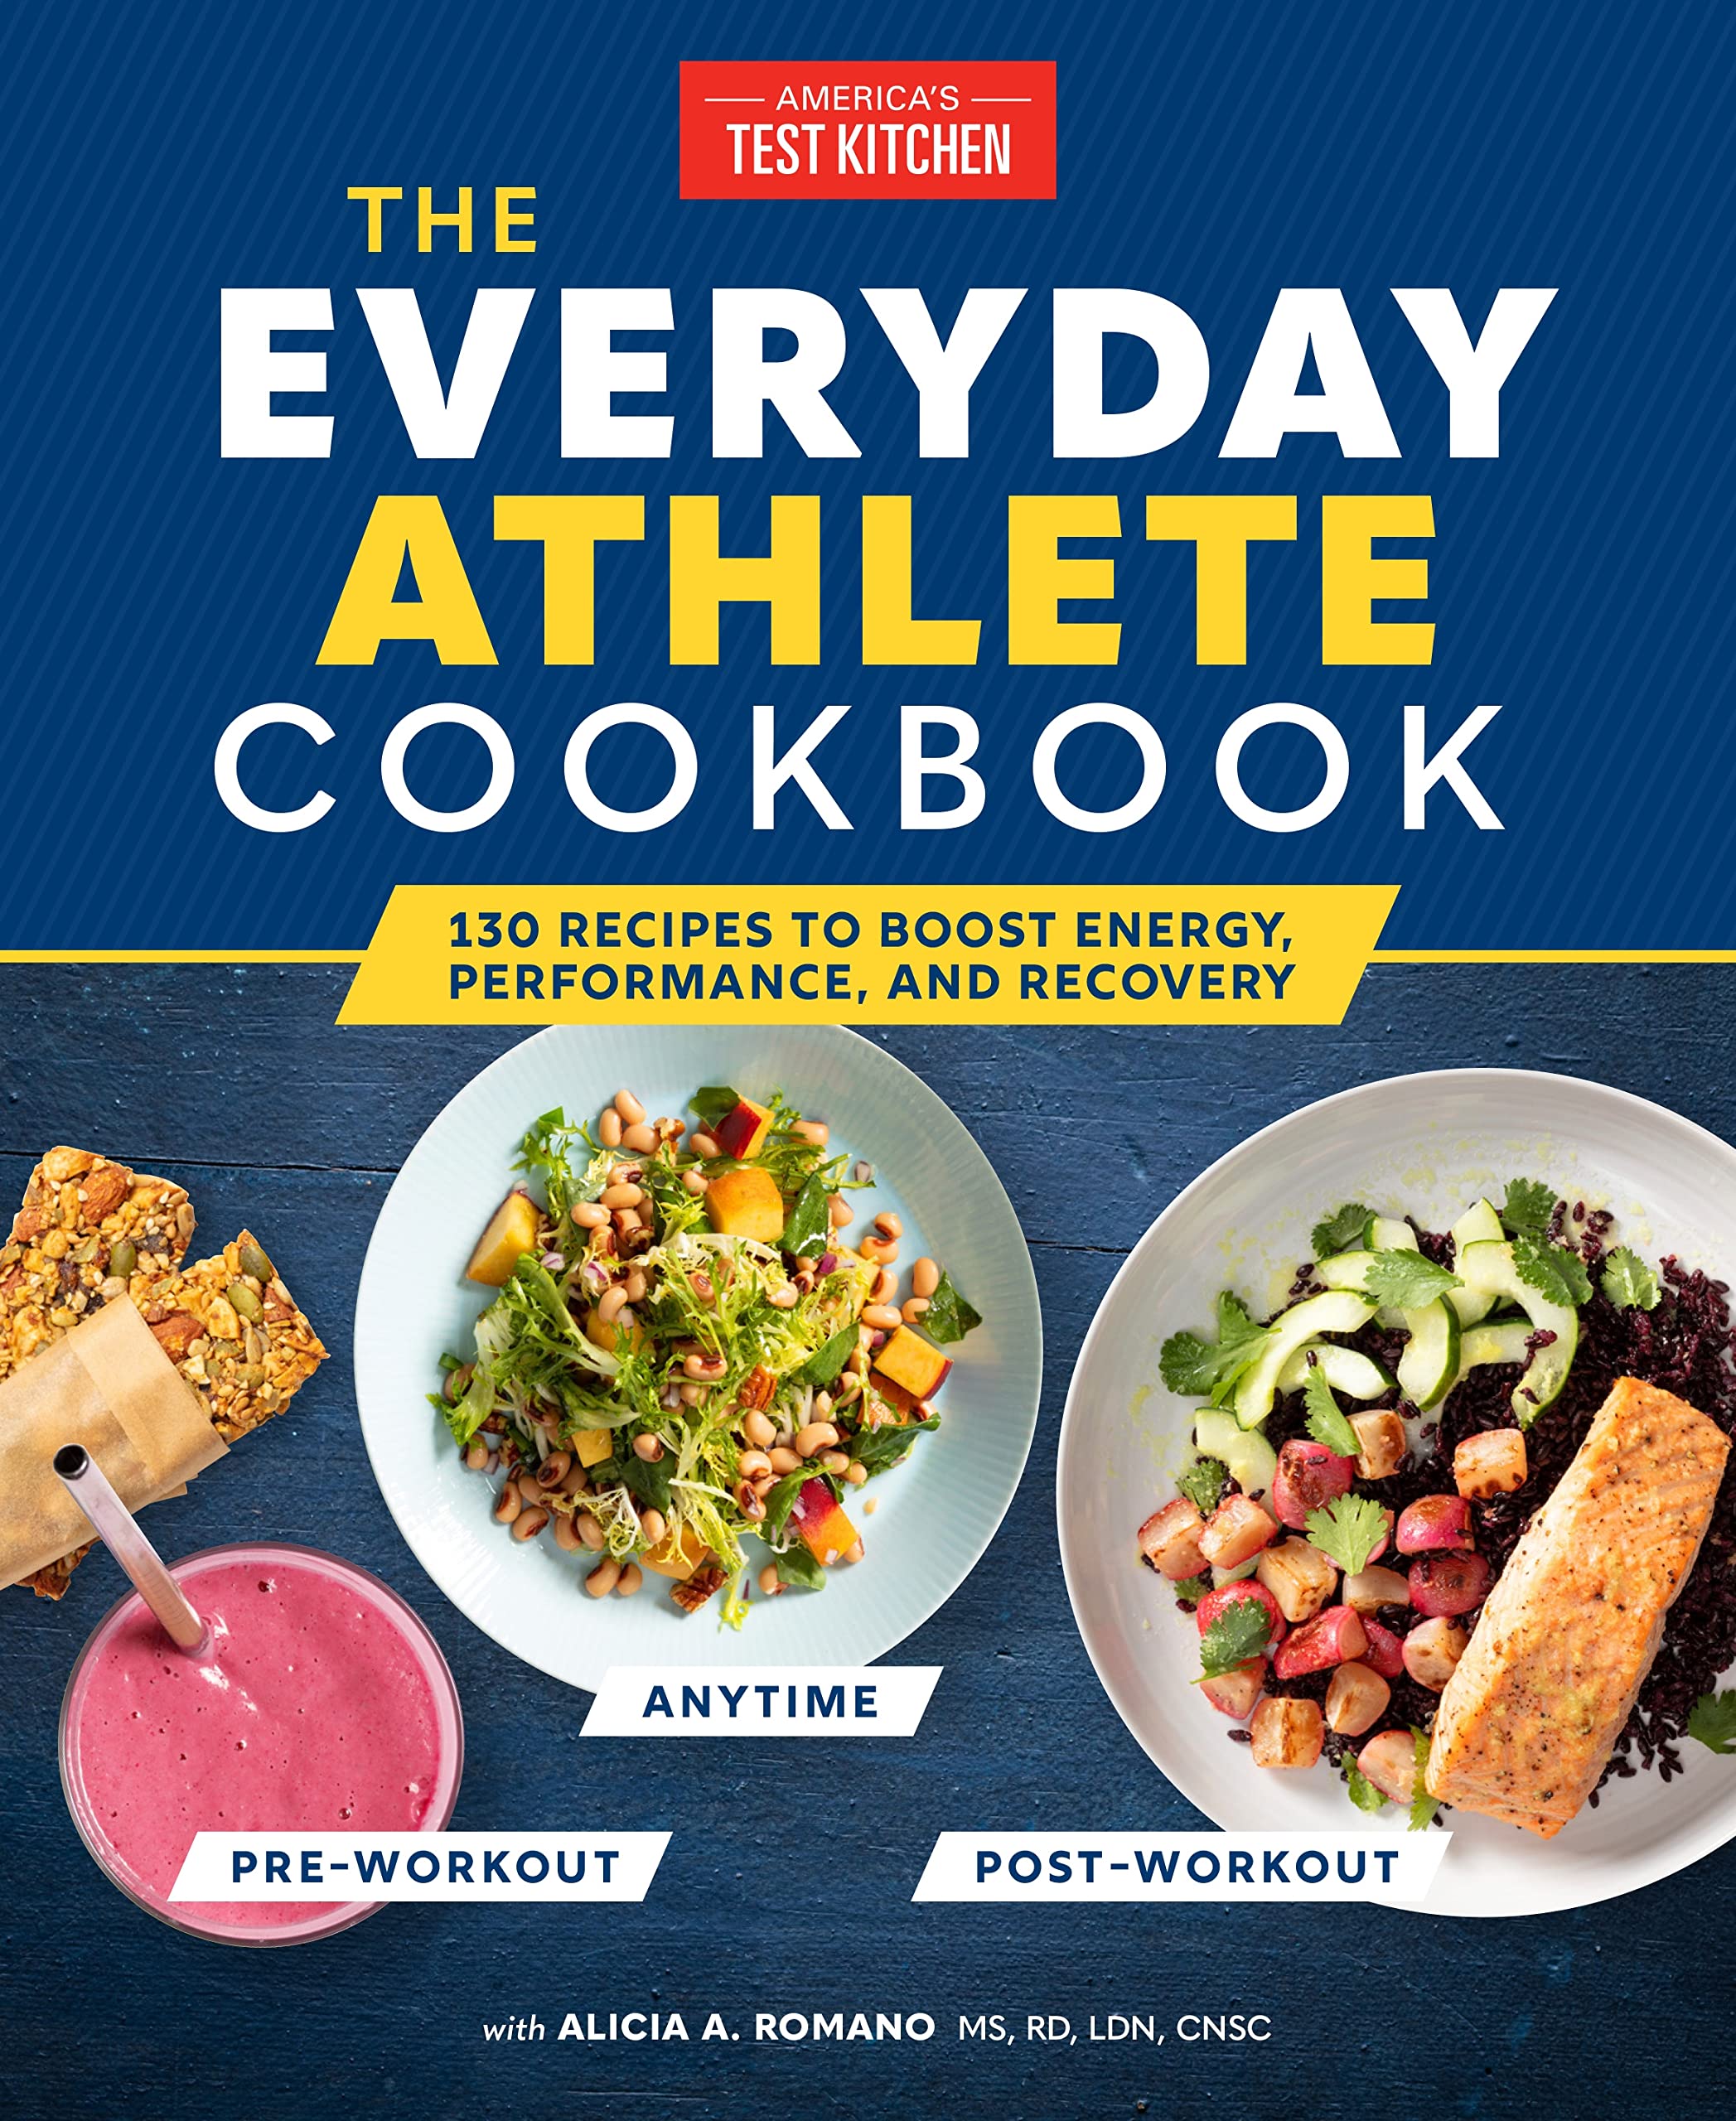 The Everyday Athlete Cookbook: 165 Recipes to Boost Energy, Performance, and Recovery (America's Test Kitchen)